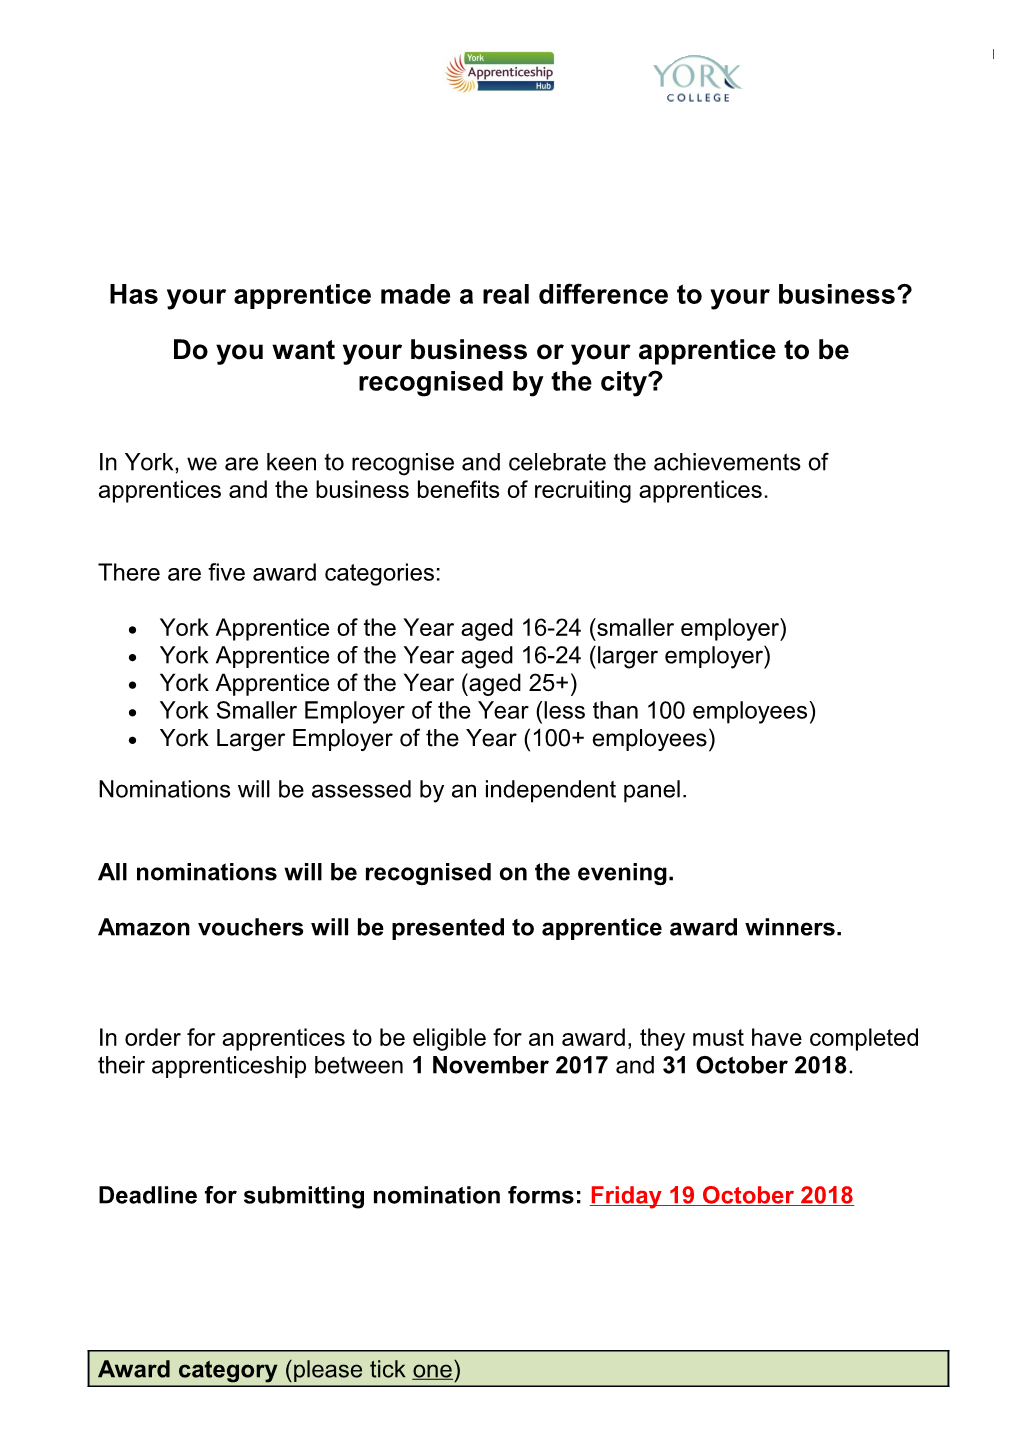 Do You Want Your Business Or Your Apprentice to Be Recognised by the City?